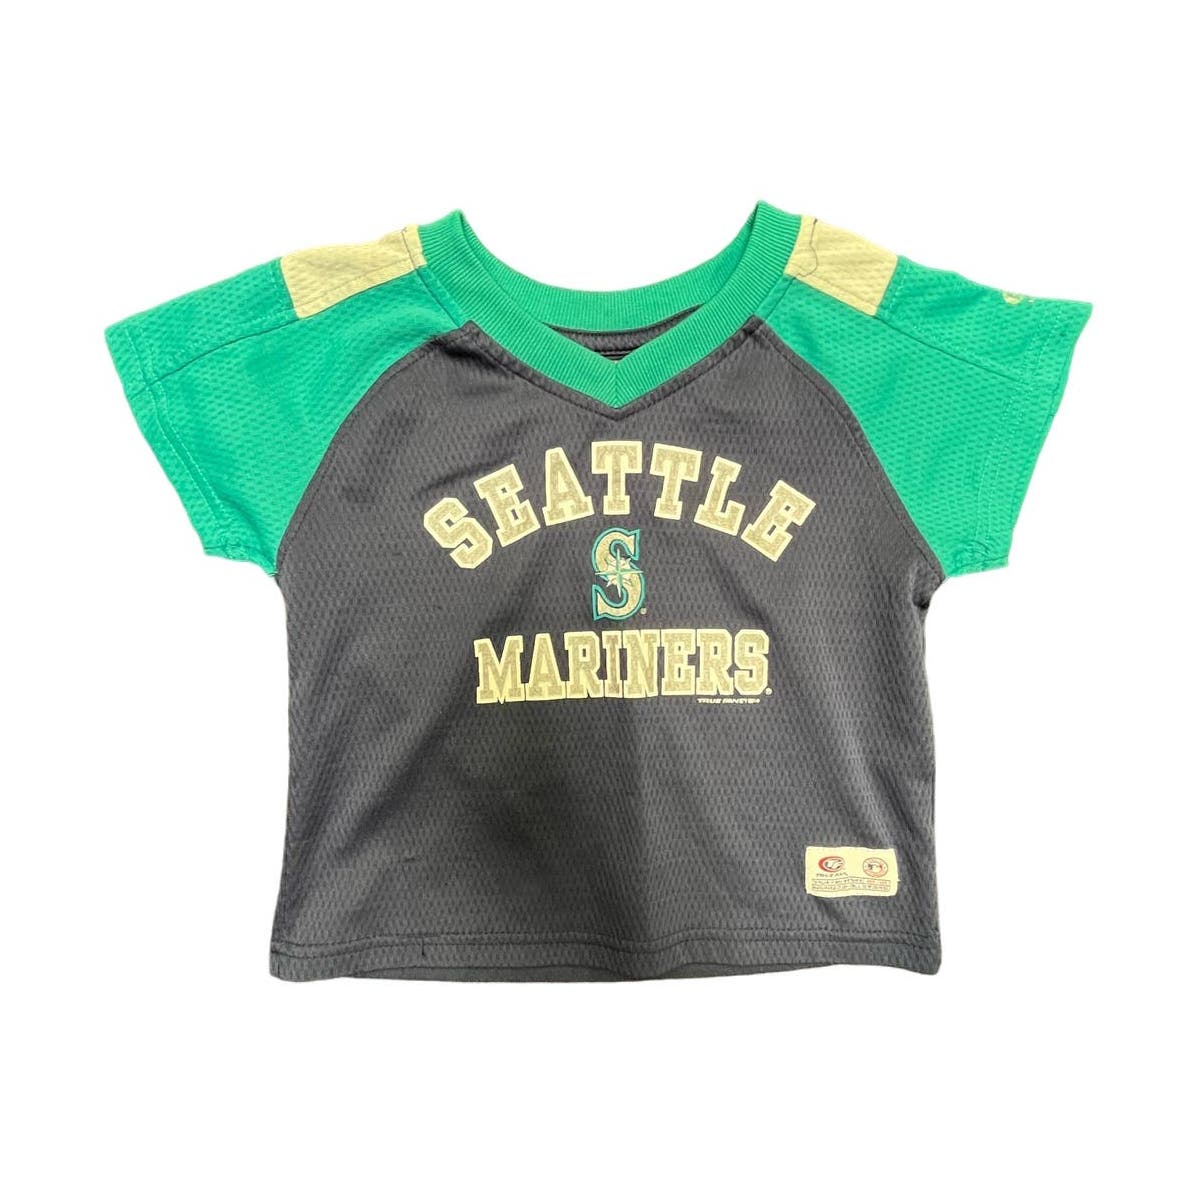 2T Toddler/Youth Seattle Mariners Vintage Blue & Green Jersey Unisex